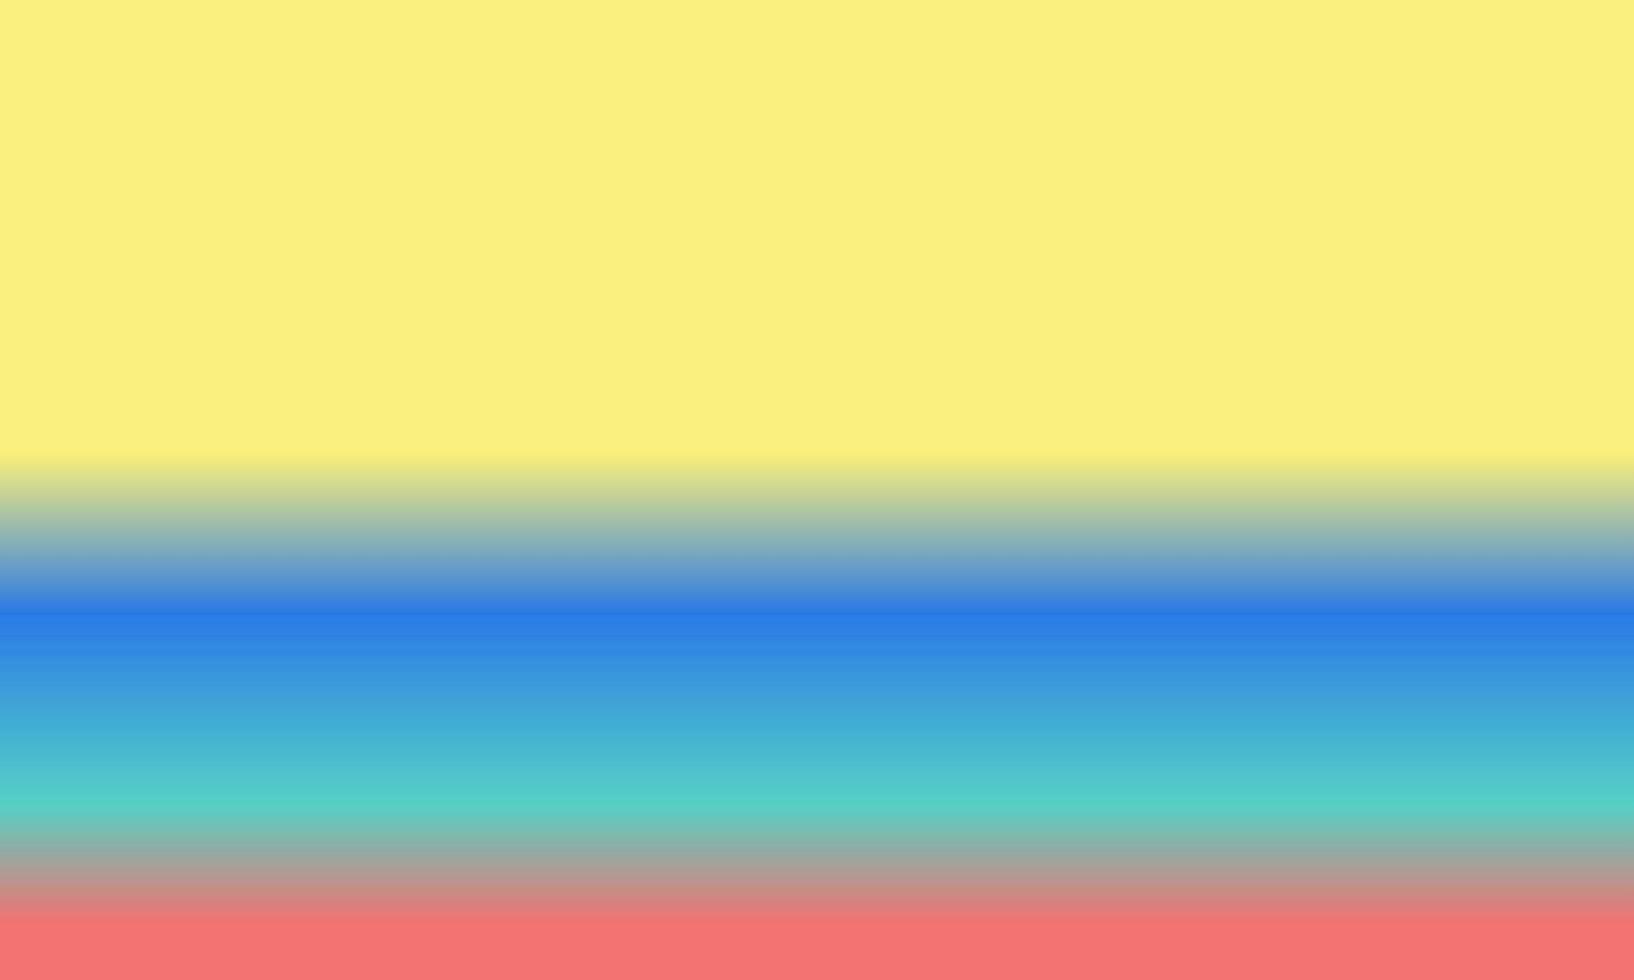 Design simple Cyan,red,yellow and blue gradient color illustration background photo